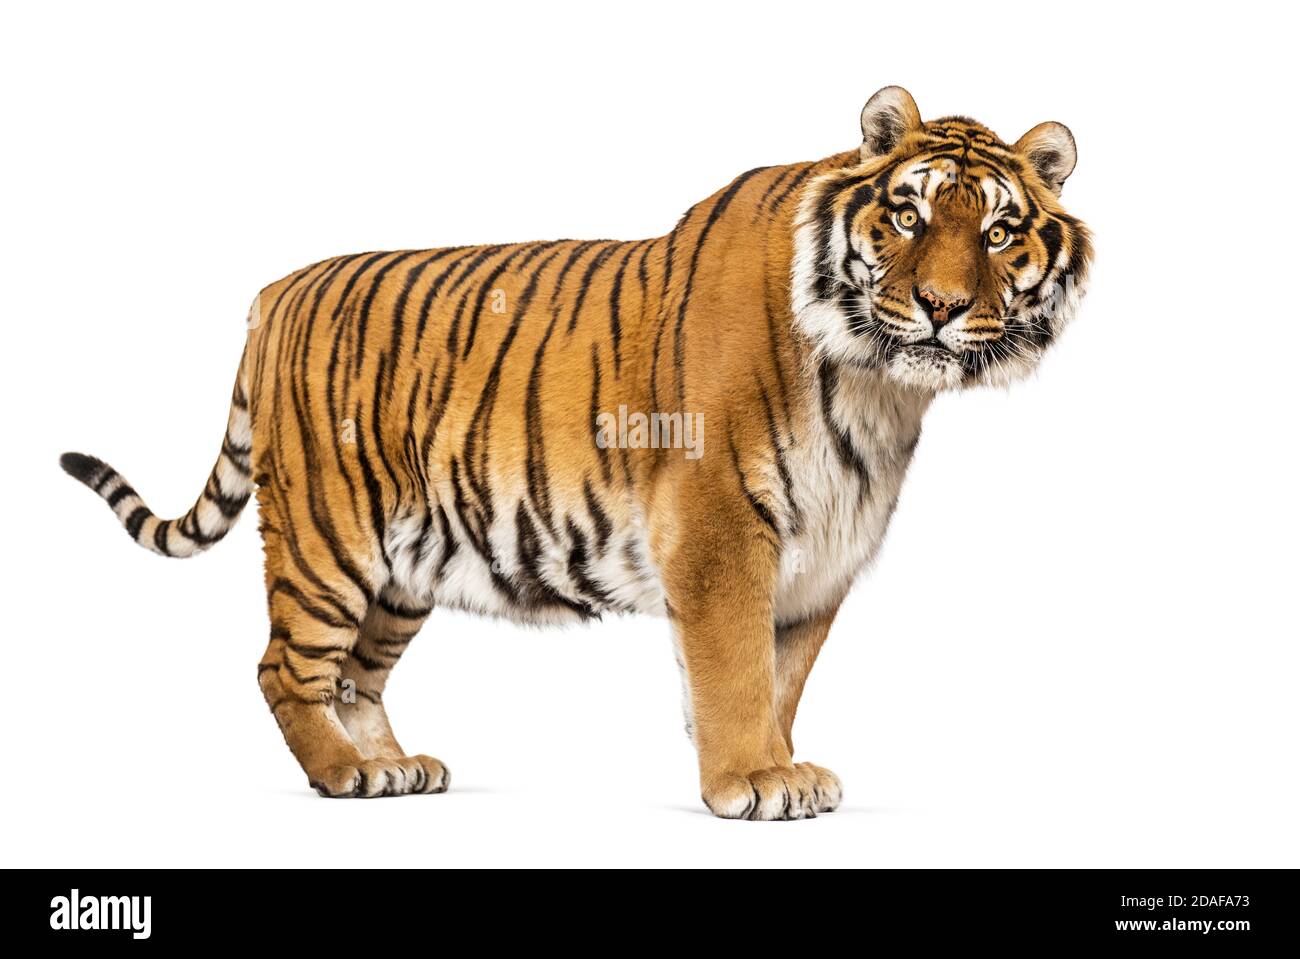 Side view, profile of a Tiger standing and looking at the camera, isolated on white Stock Photo